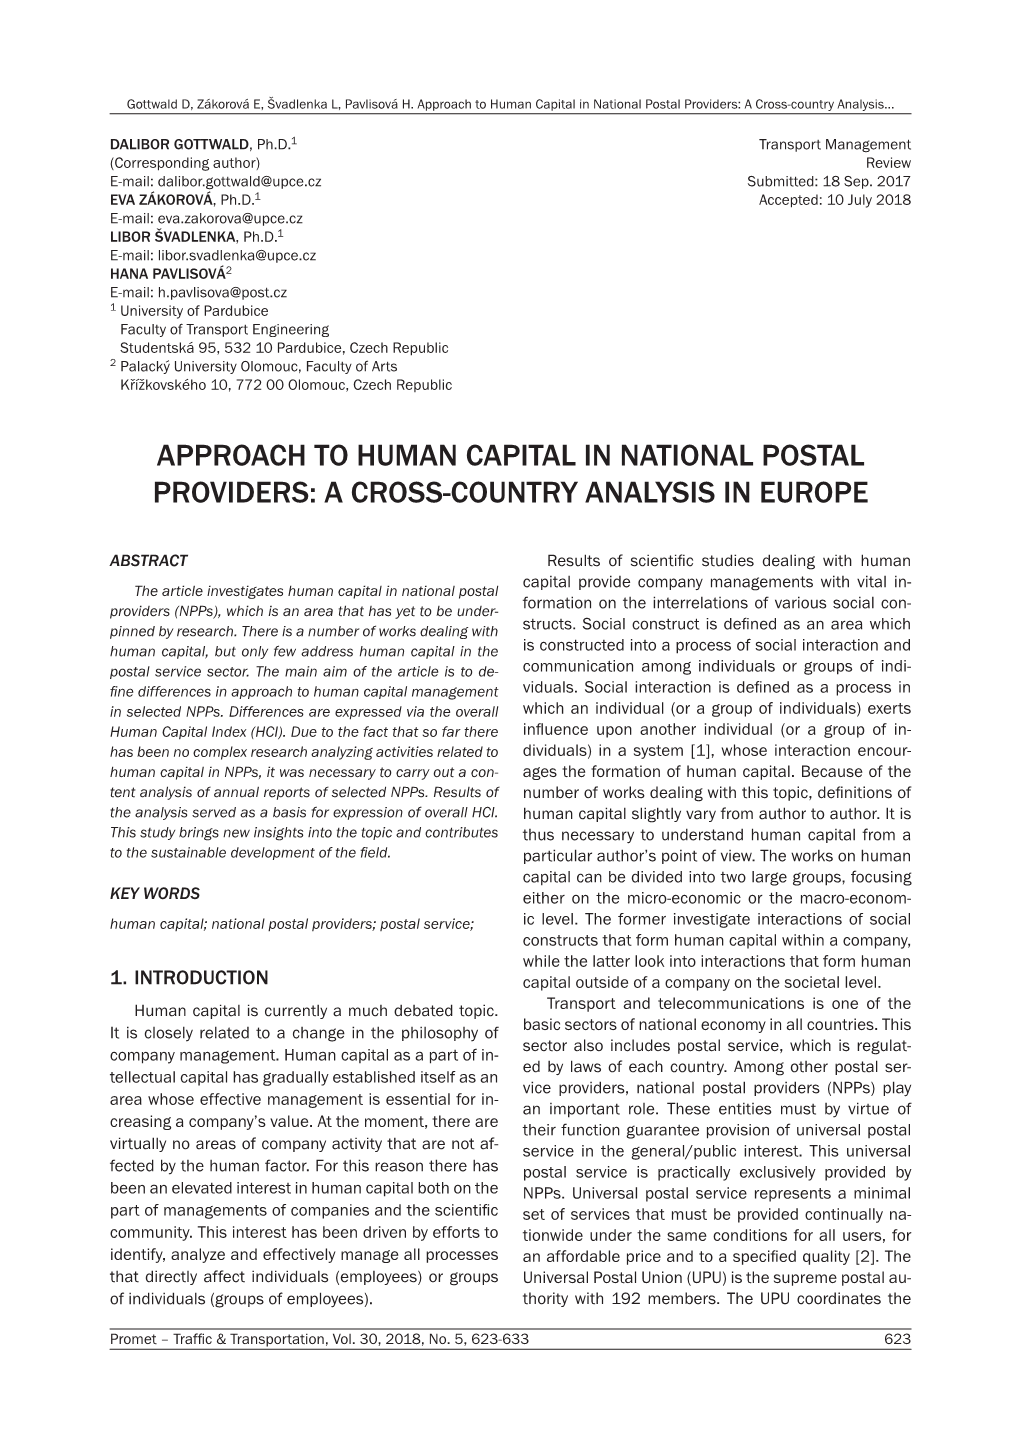 Approach to Human Capital in National Postal Providers: a Cross-Country Analysis